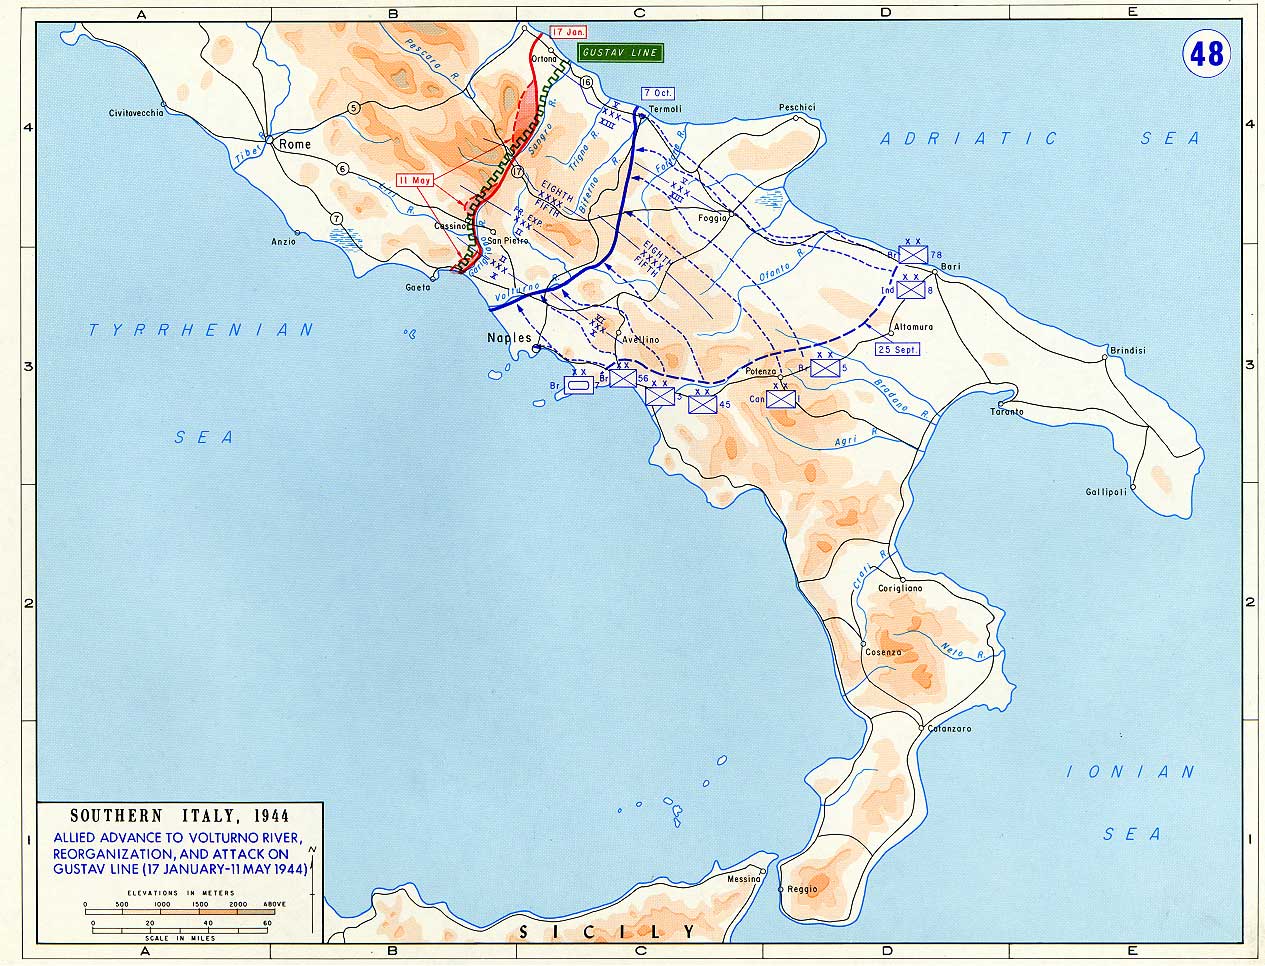 <p class='eng'>Southern Italy, 1944. Allied advance to Volturno River, reorganization and attack on the Gustav Line (17 January - 11 May 1944).</p>